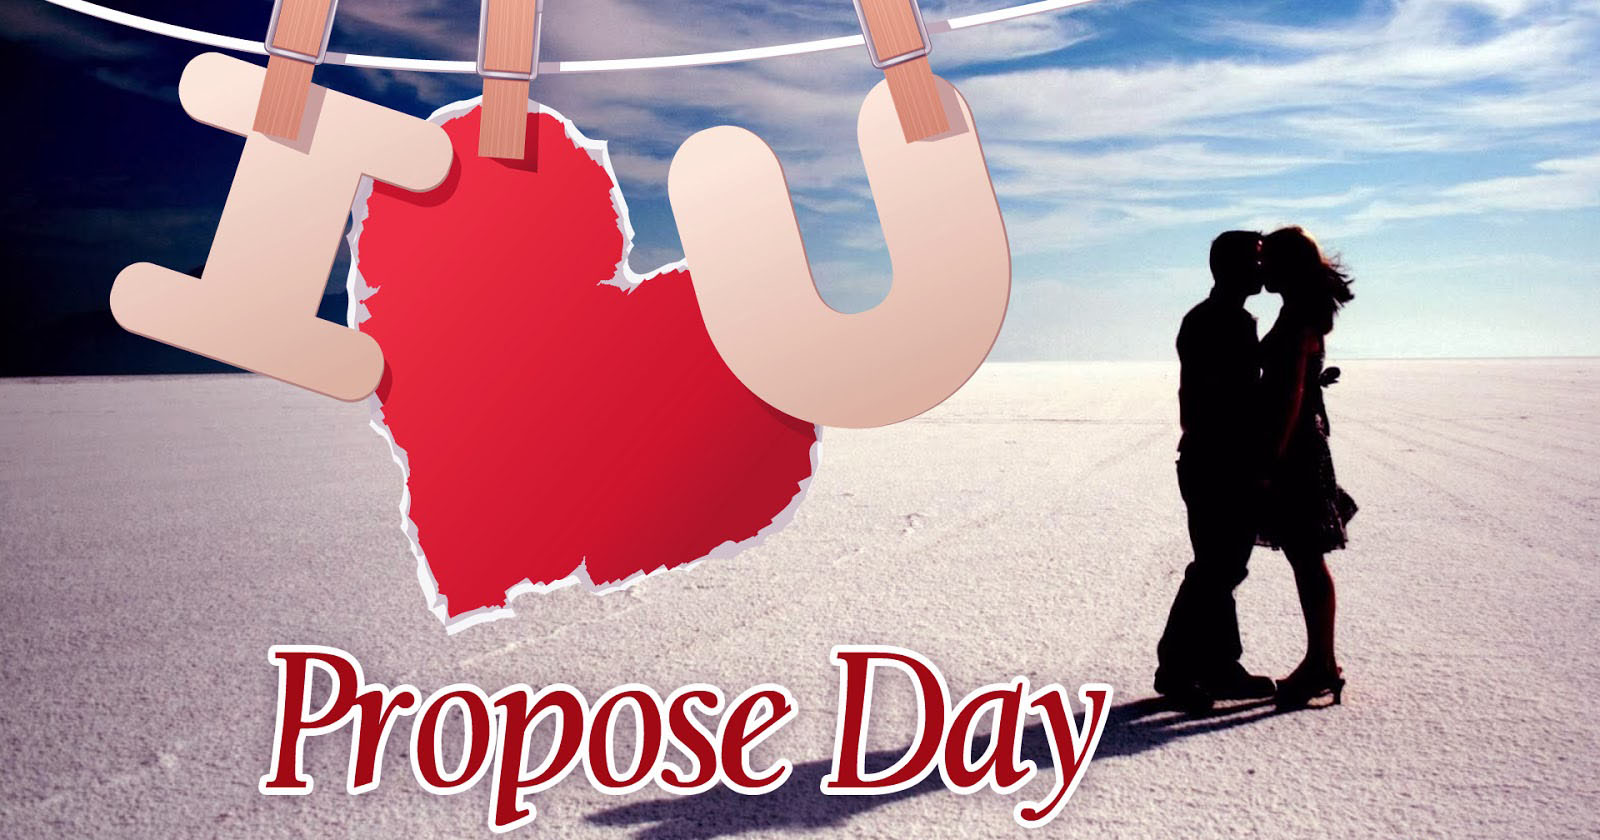 happy-propose-day-wallpaper